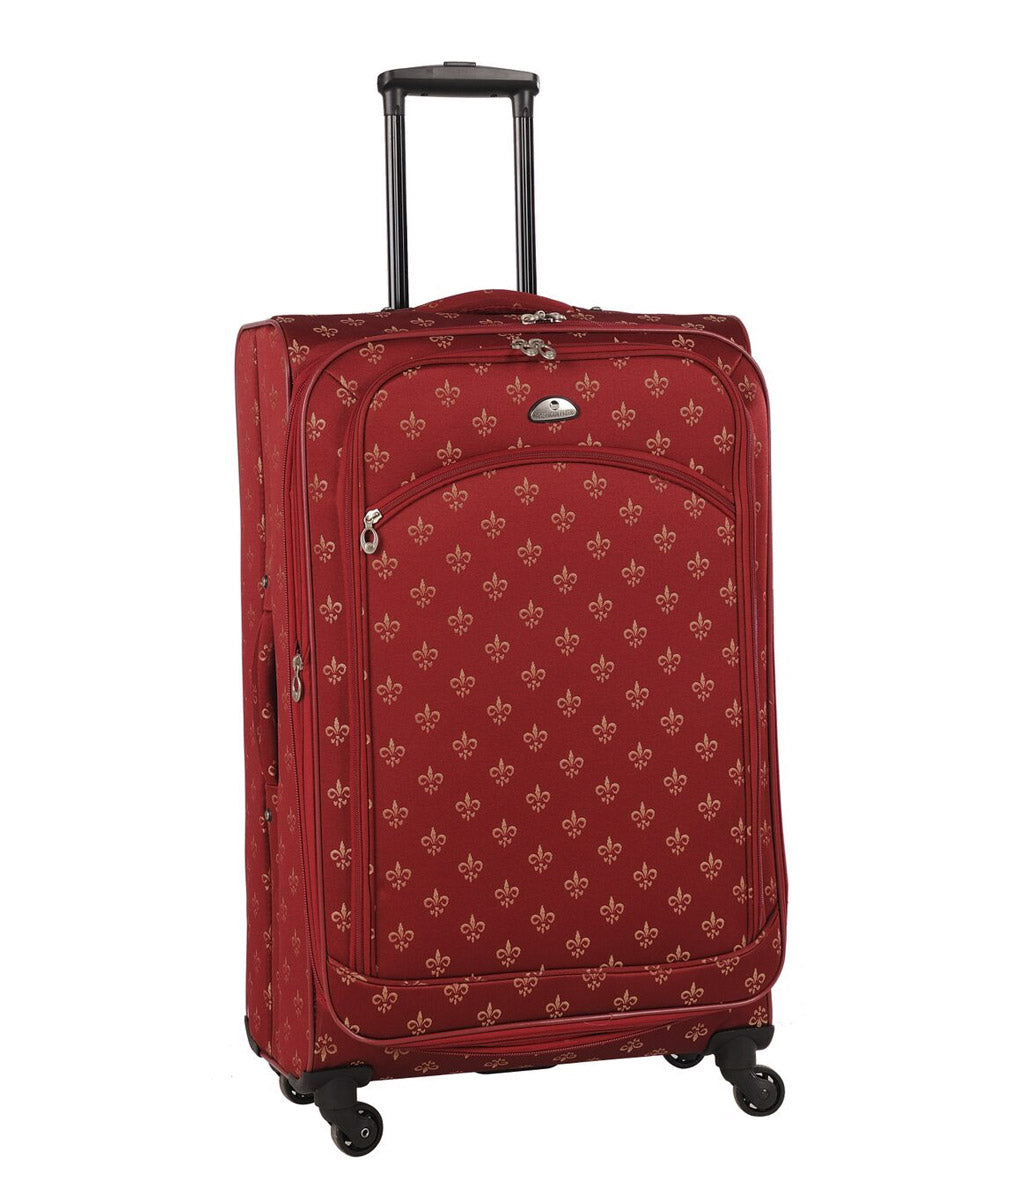 LongLat, Inc Luggage Solution featuring name brands for your travel needs